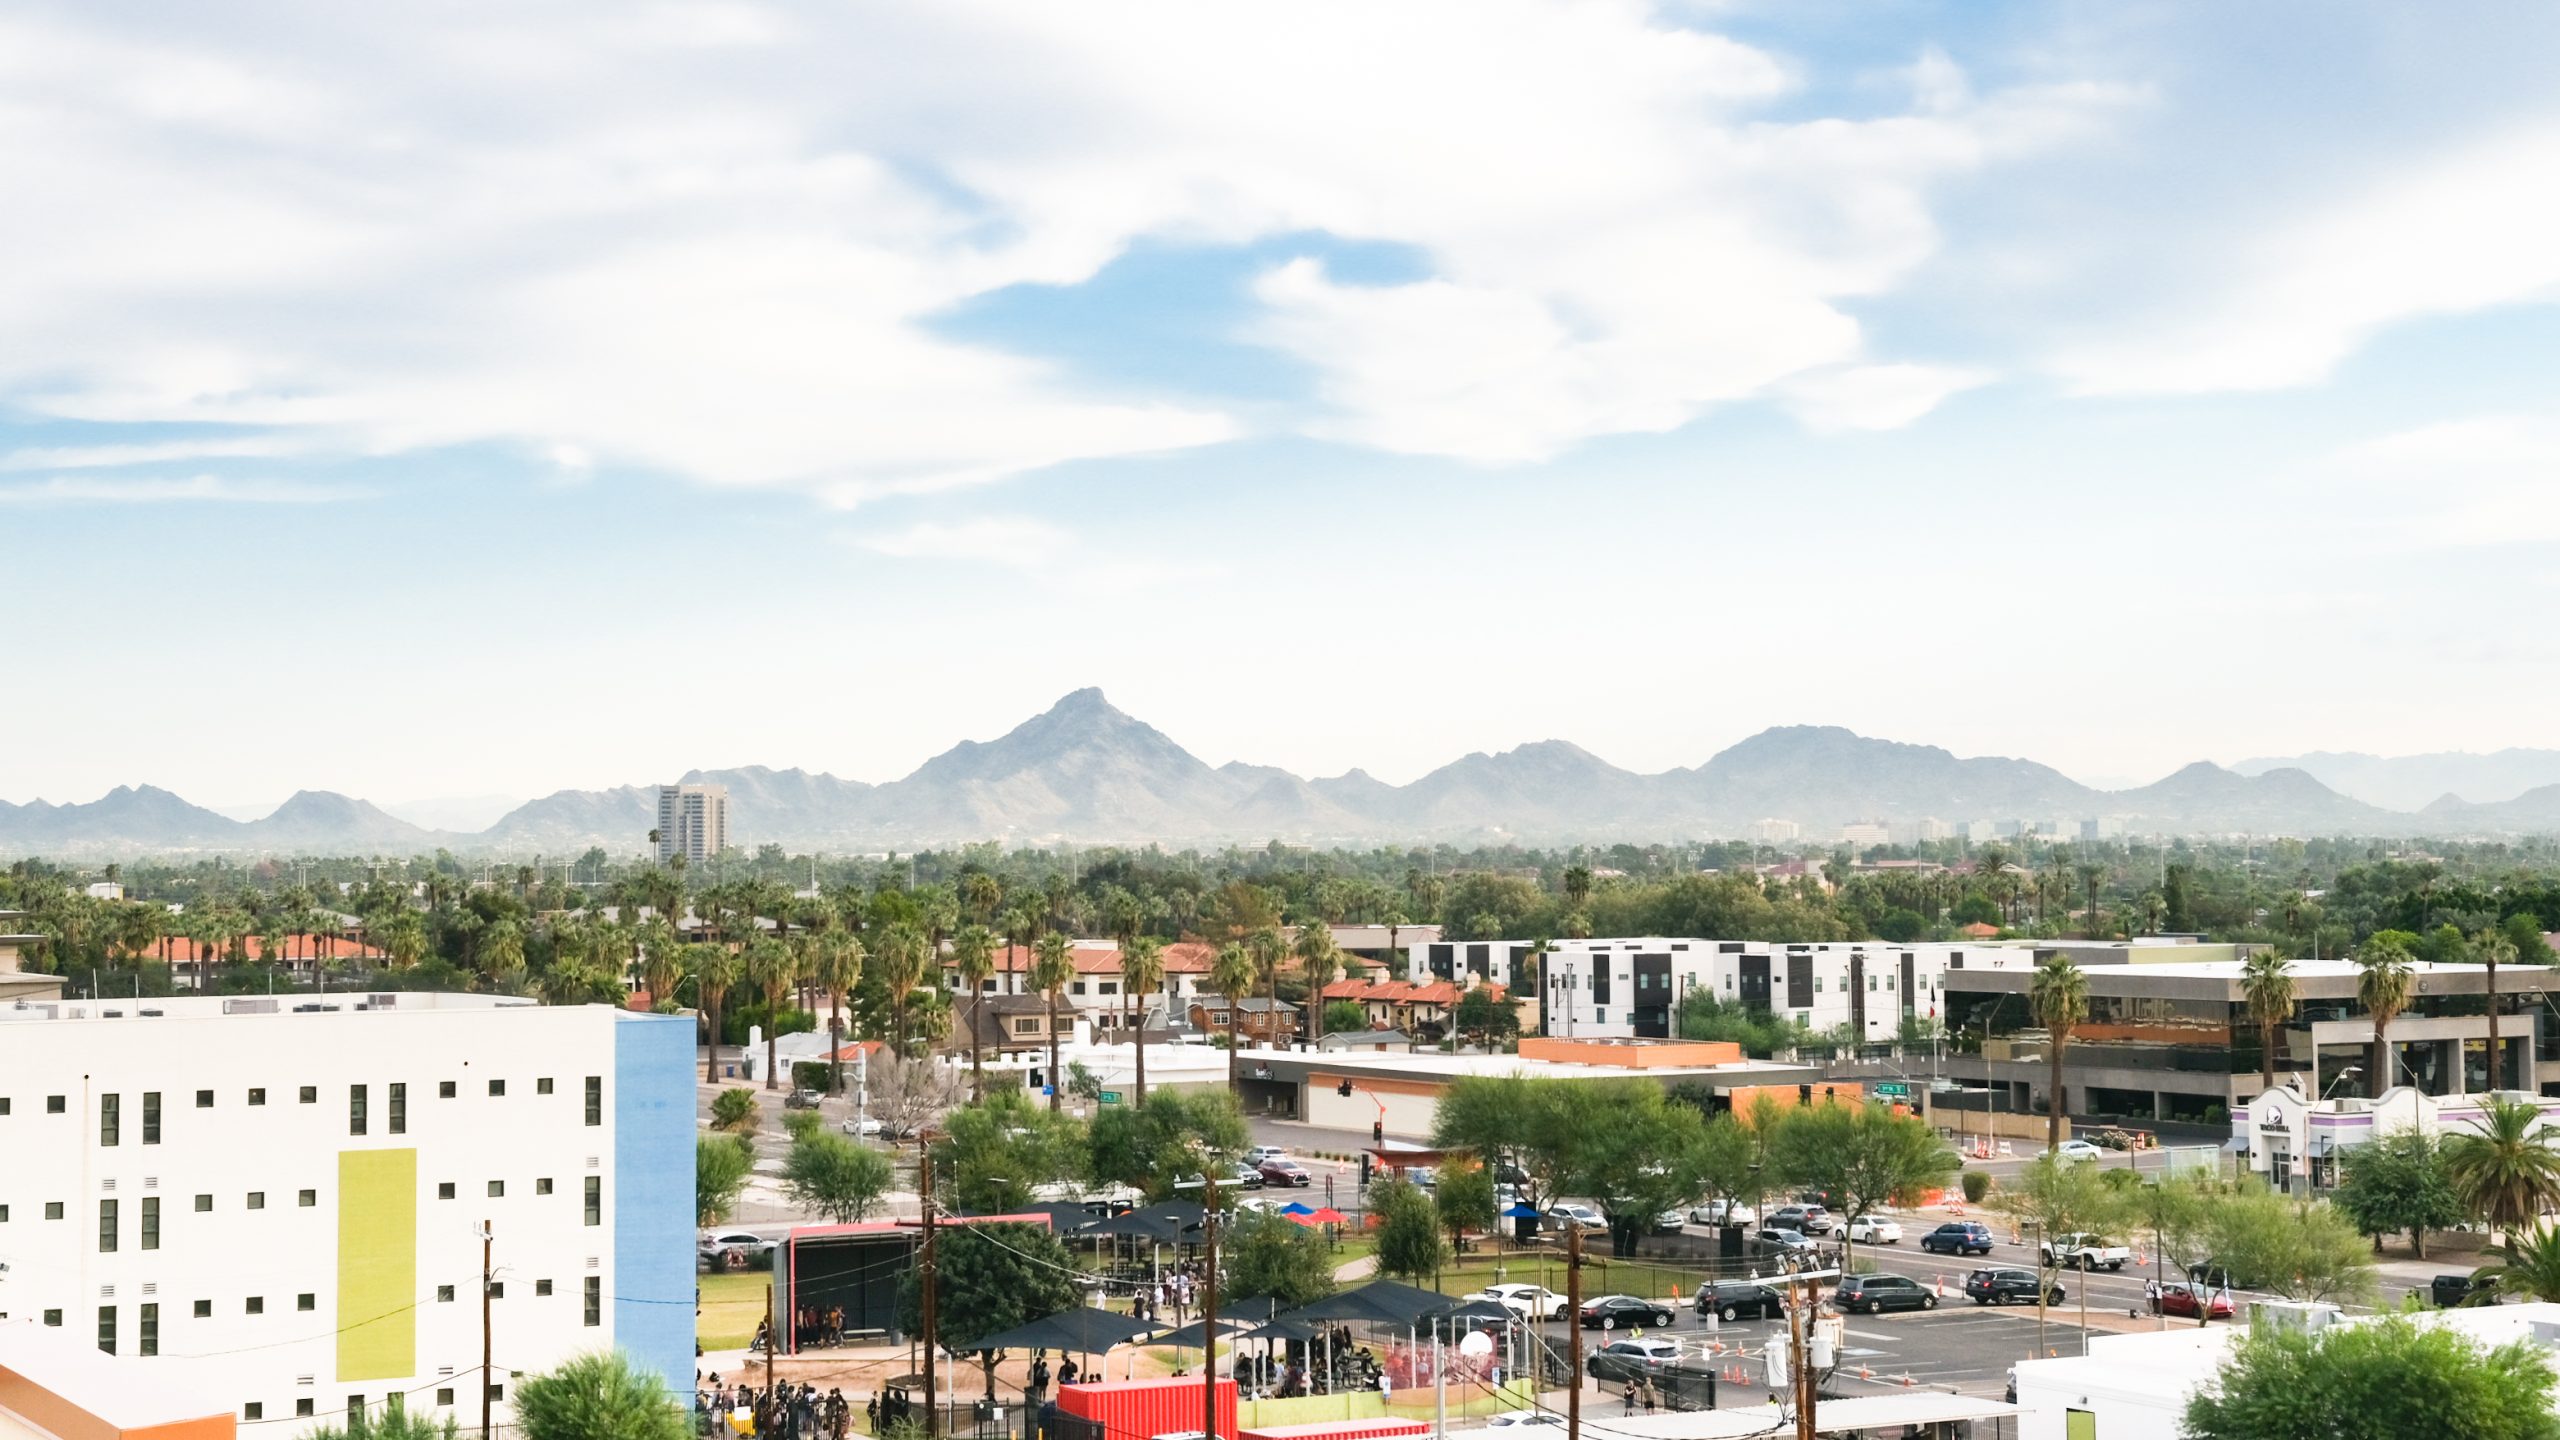 Photograph of the city of Phoenix with mountains in the background.